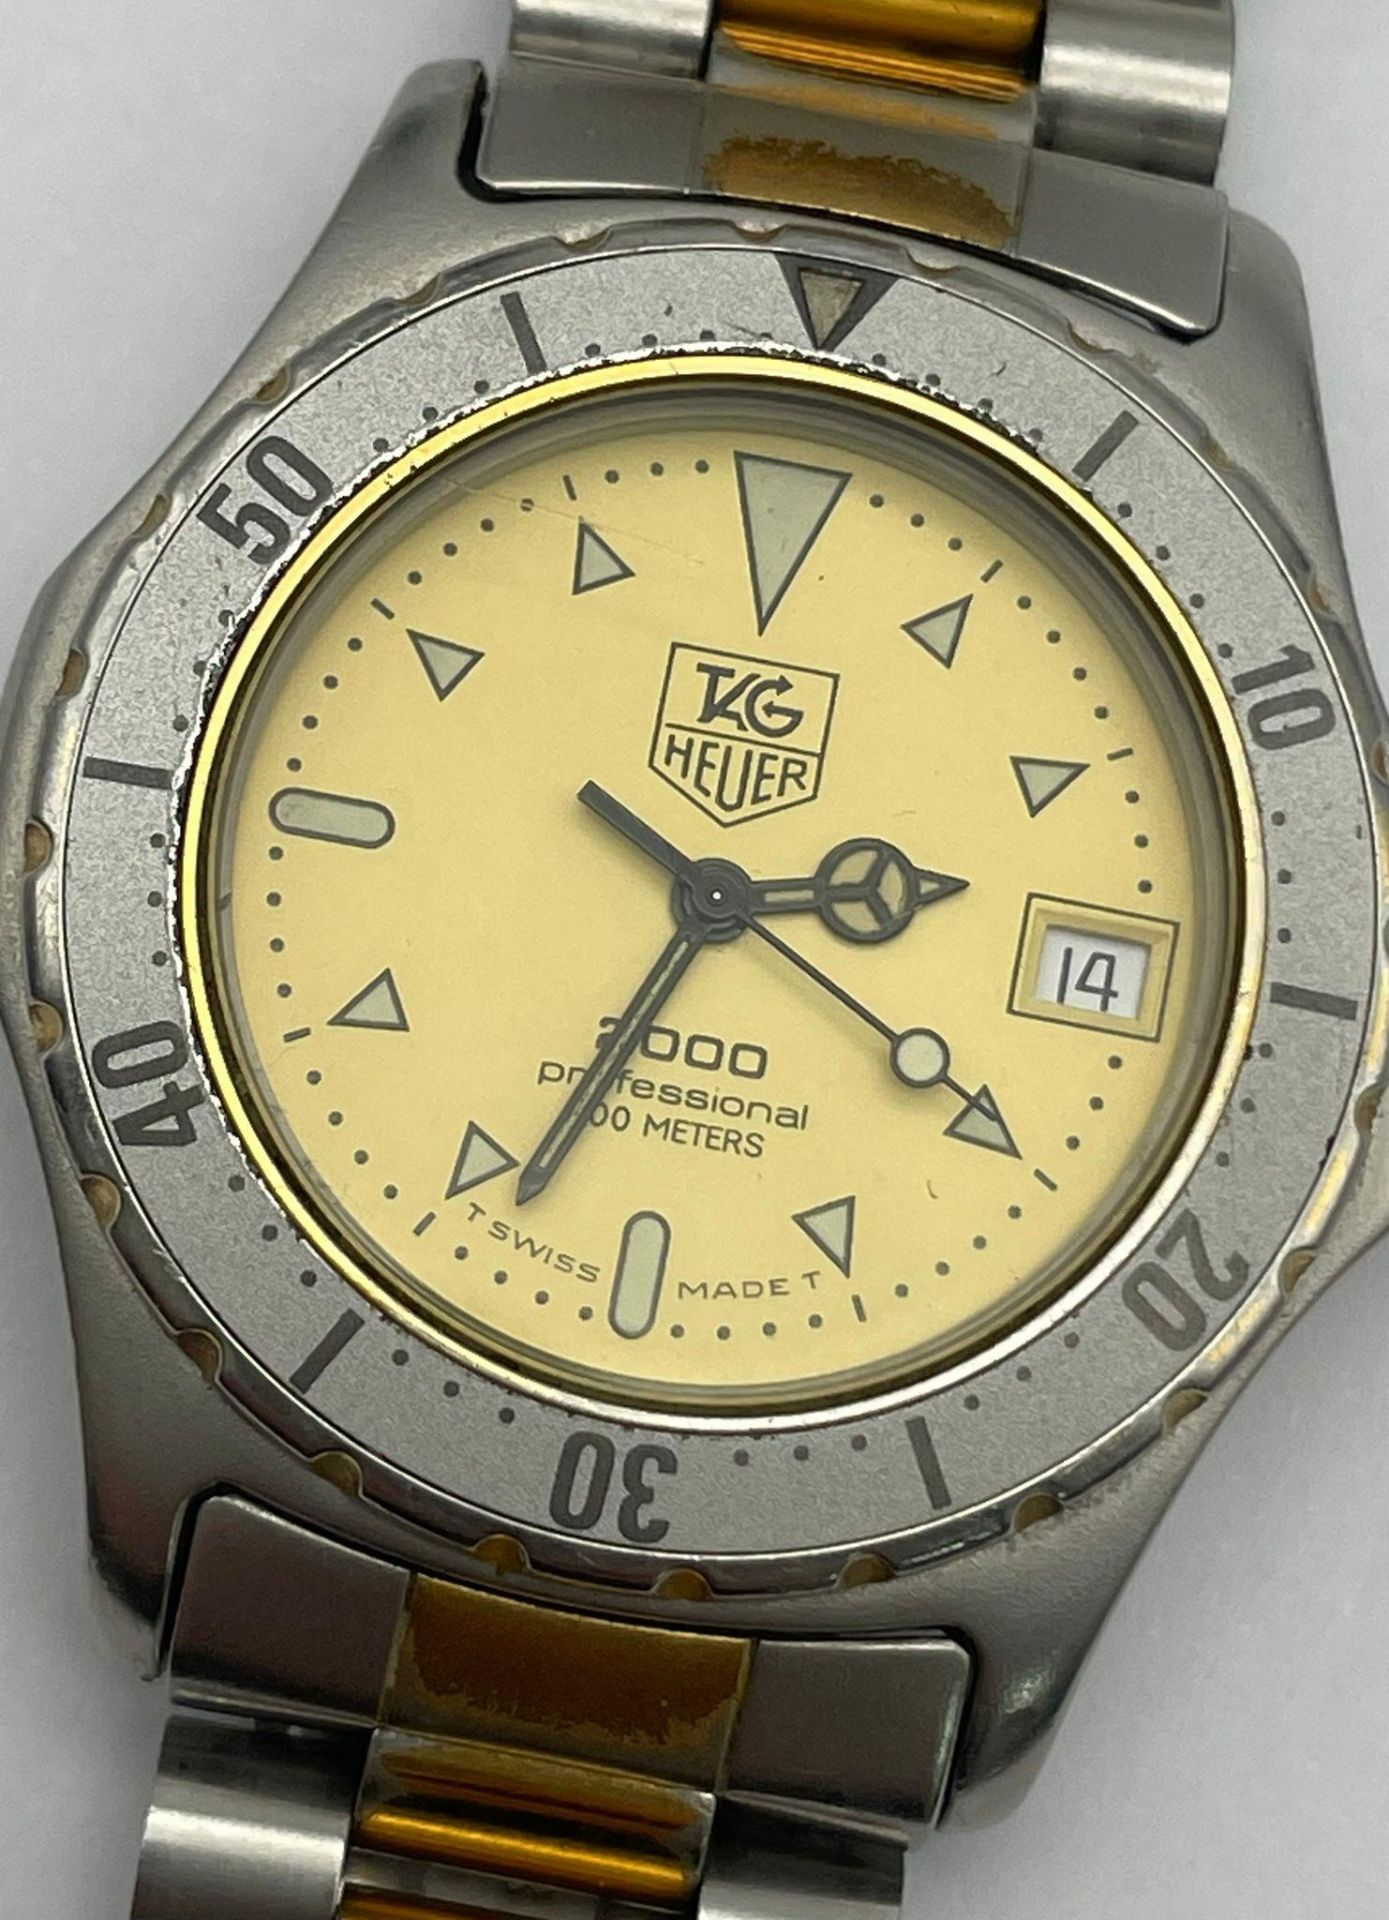 A Tag Heuer 2000 Professional 200m, Swiss Made, Stainless Steel Bracelet Watch. Gold Tone, Yellow - Bild 7 aus 7